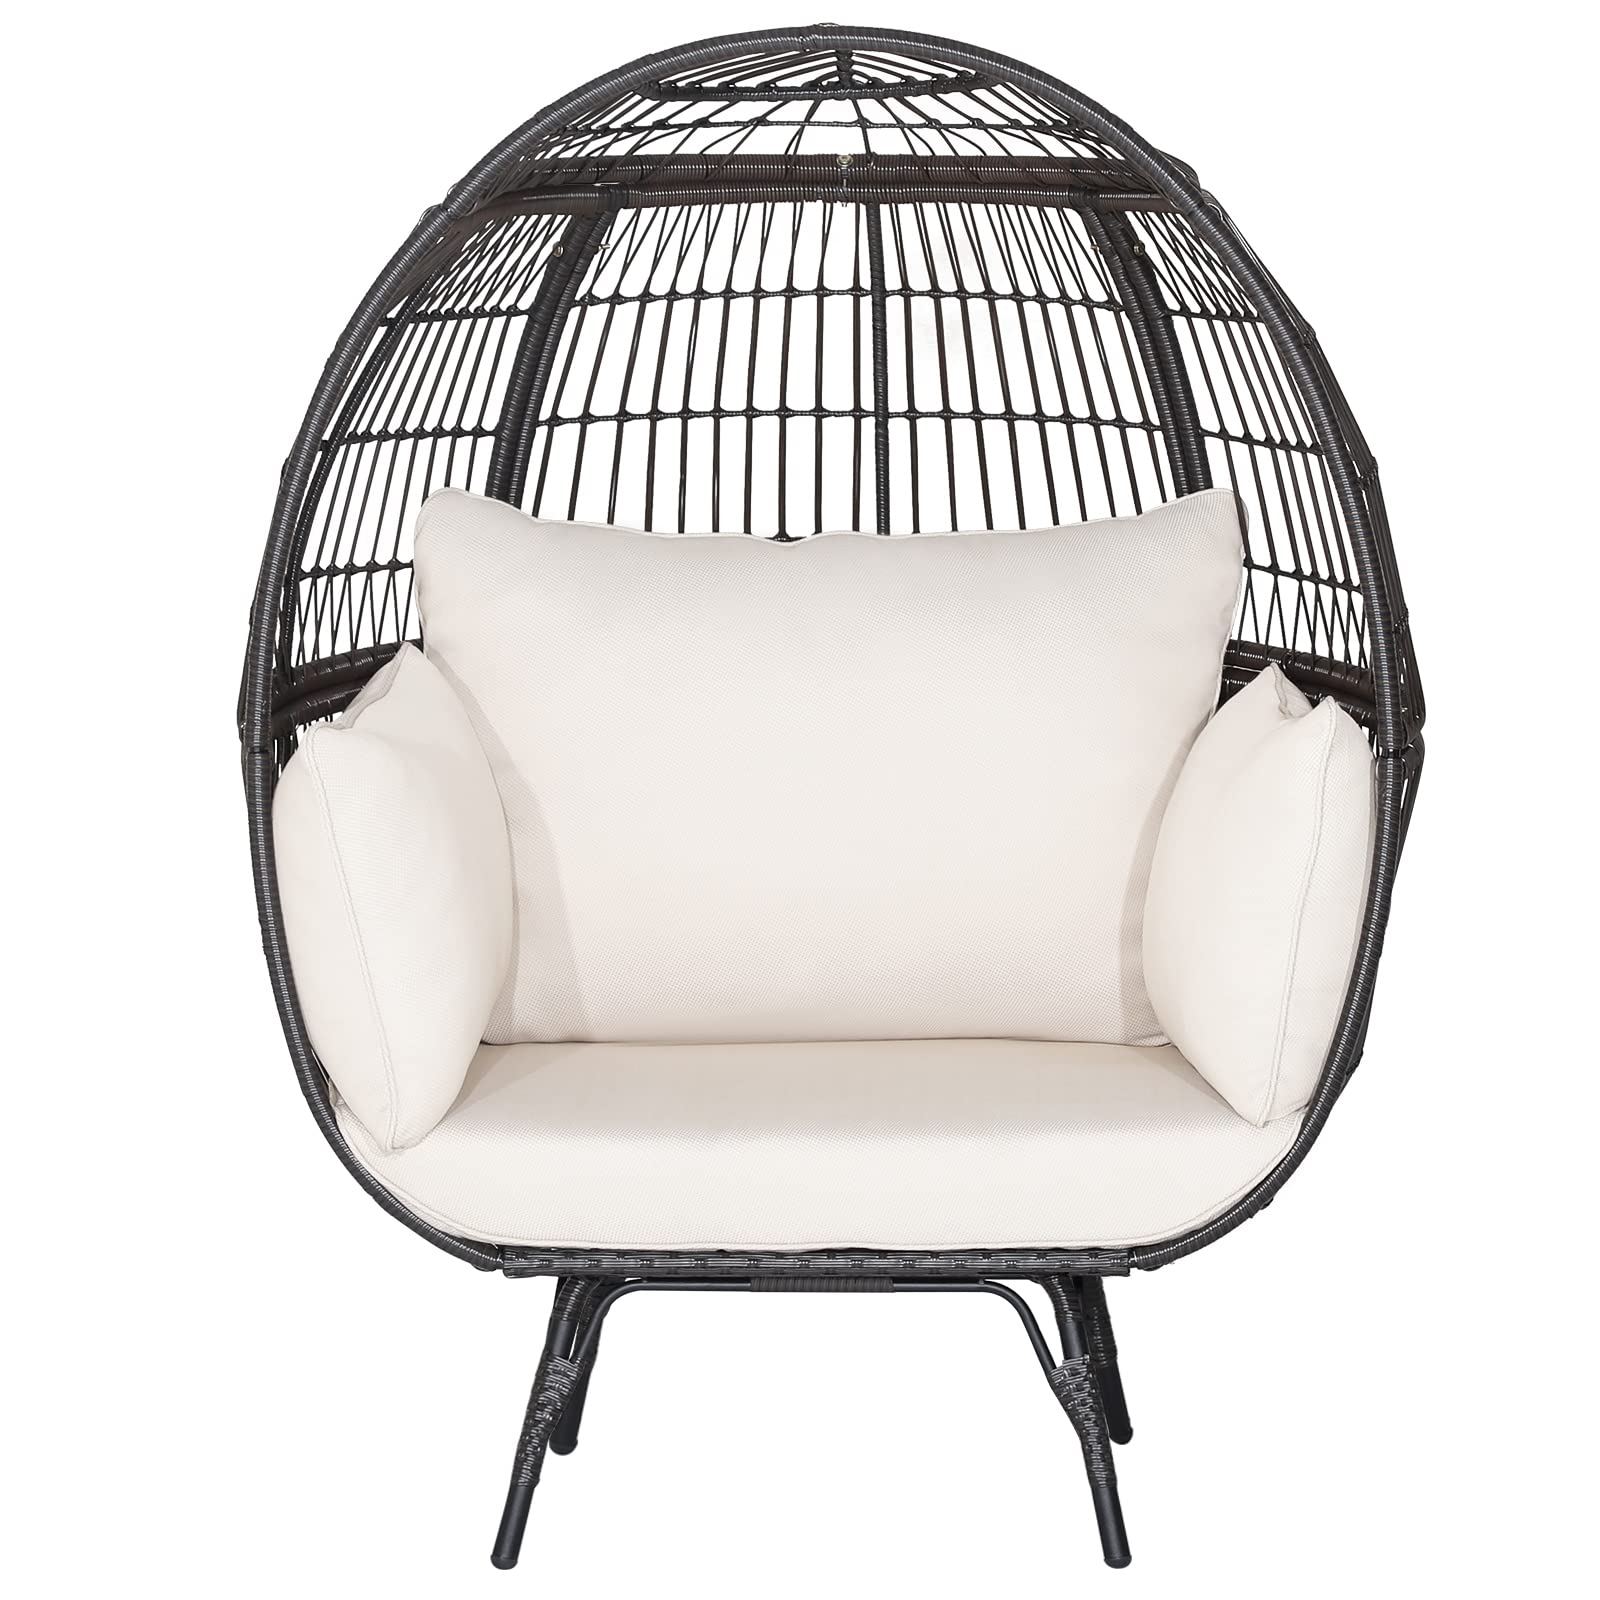 Giantex PE Rattan Egg Chair - Oversized Hammock Chair with Thick Cushions & Sturdy Metal Frame